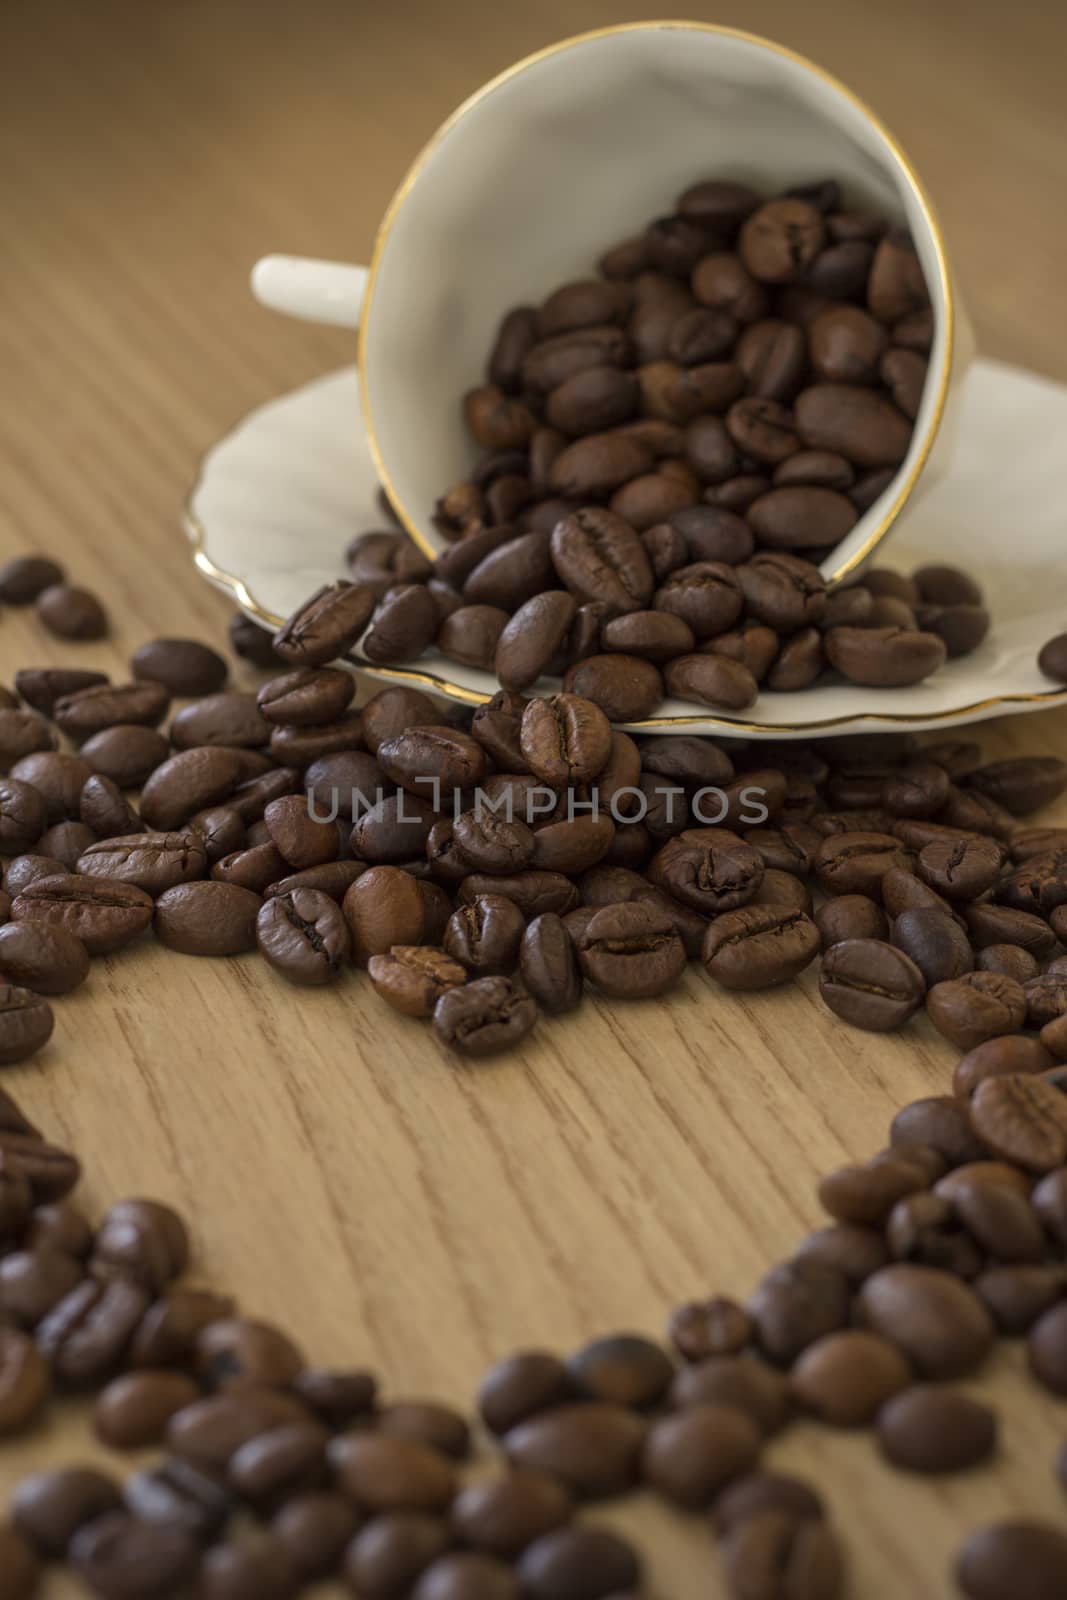 Morning heart. Heart shape made from coffee beans and a cup of coffee with beans,blurred